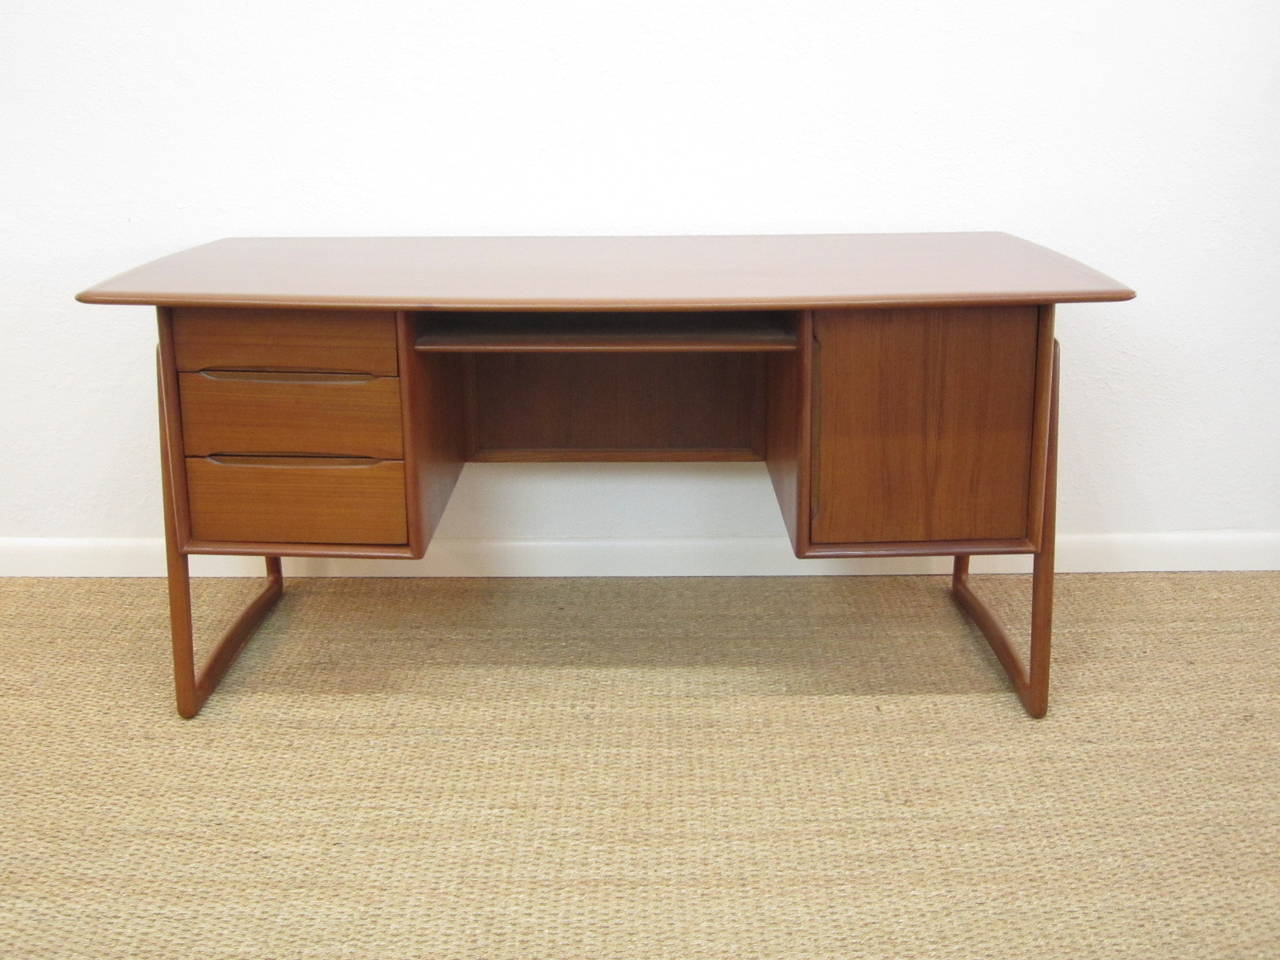 Finely finished Danish teak desk with raffia insert facing forward. Finished all the way around so can float as an executive desk. Center paper slot, right hand door, and left hand drawers--finished inside and out.